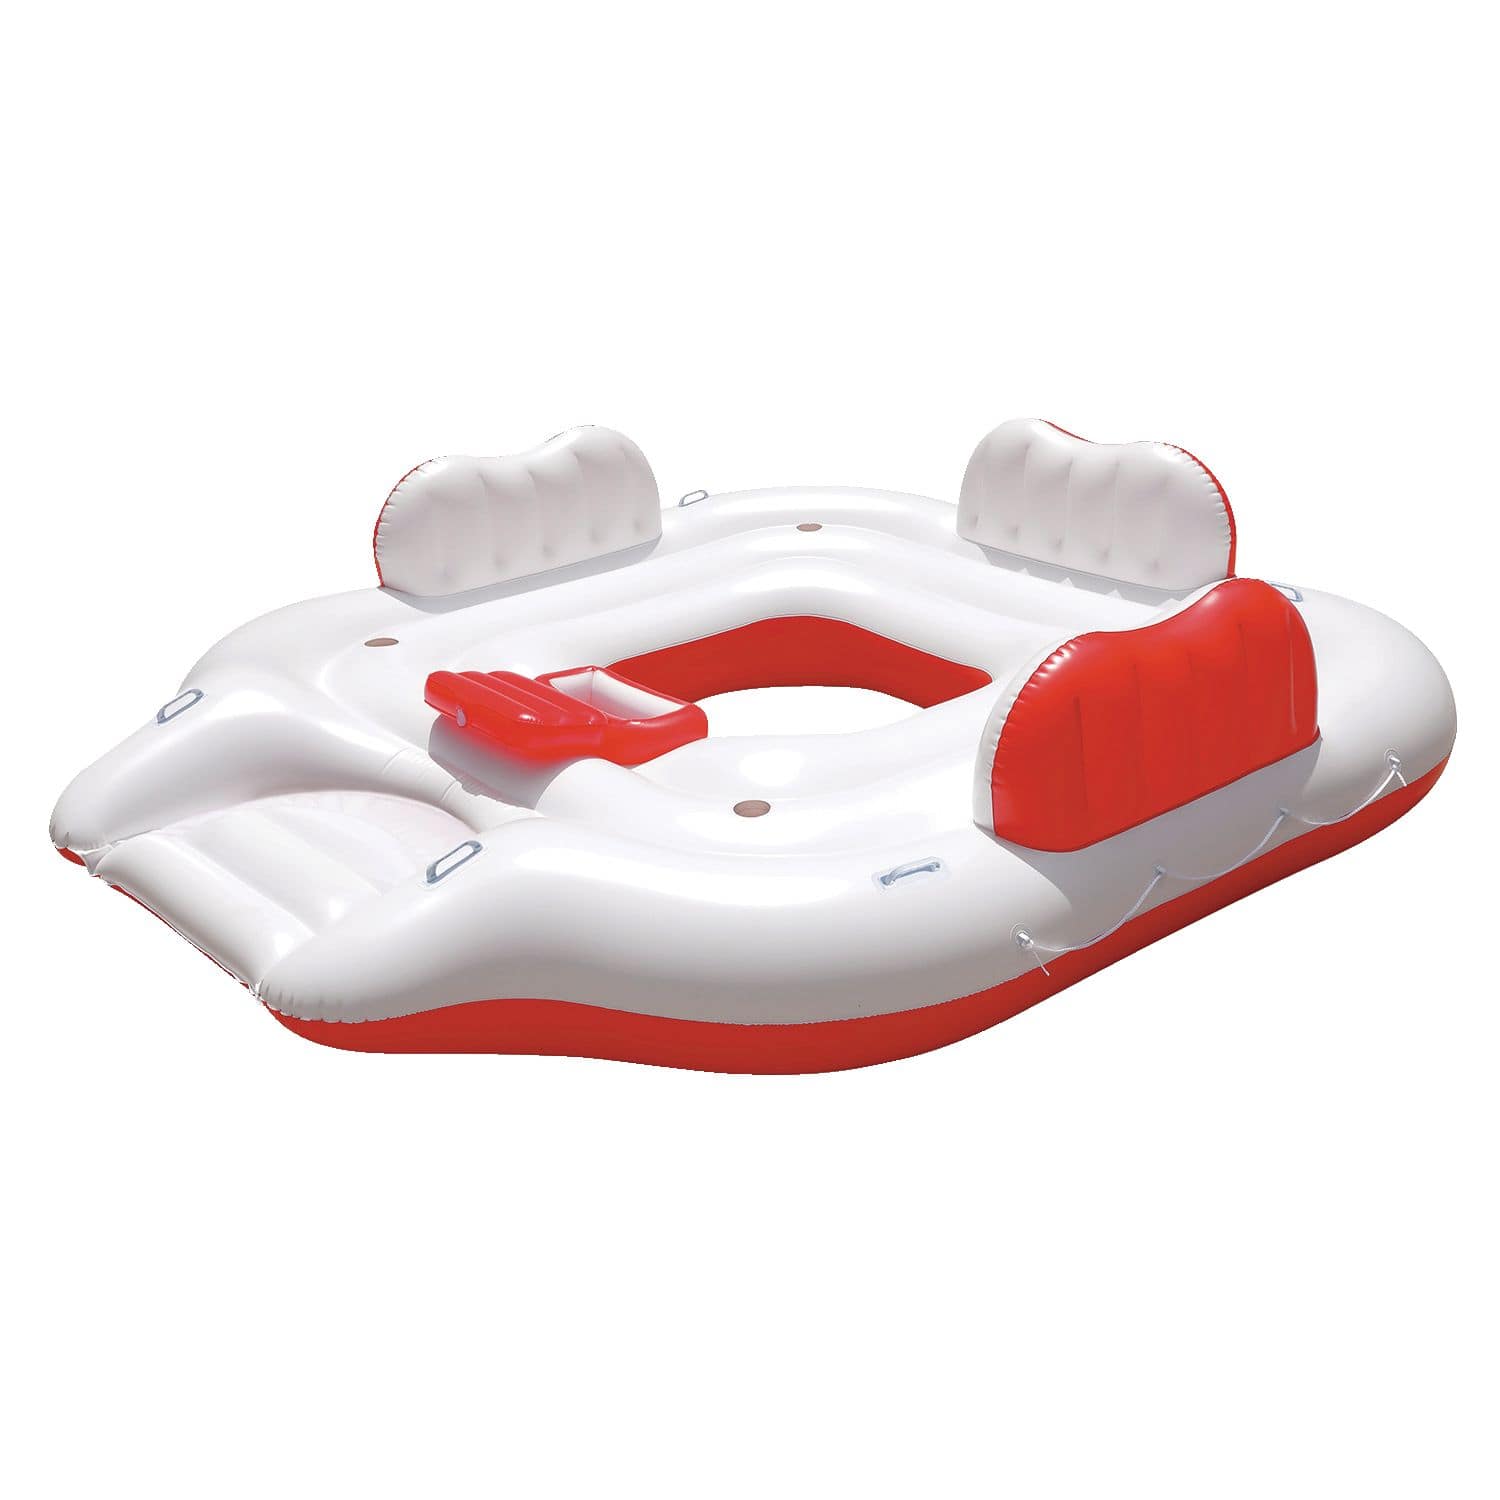 Enjoy The Waves With A Wholesale inflatable fishing raft motor